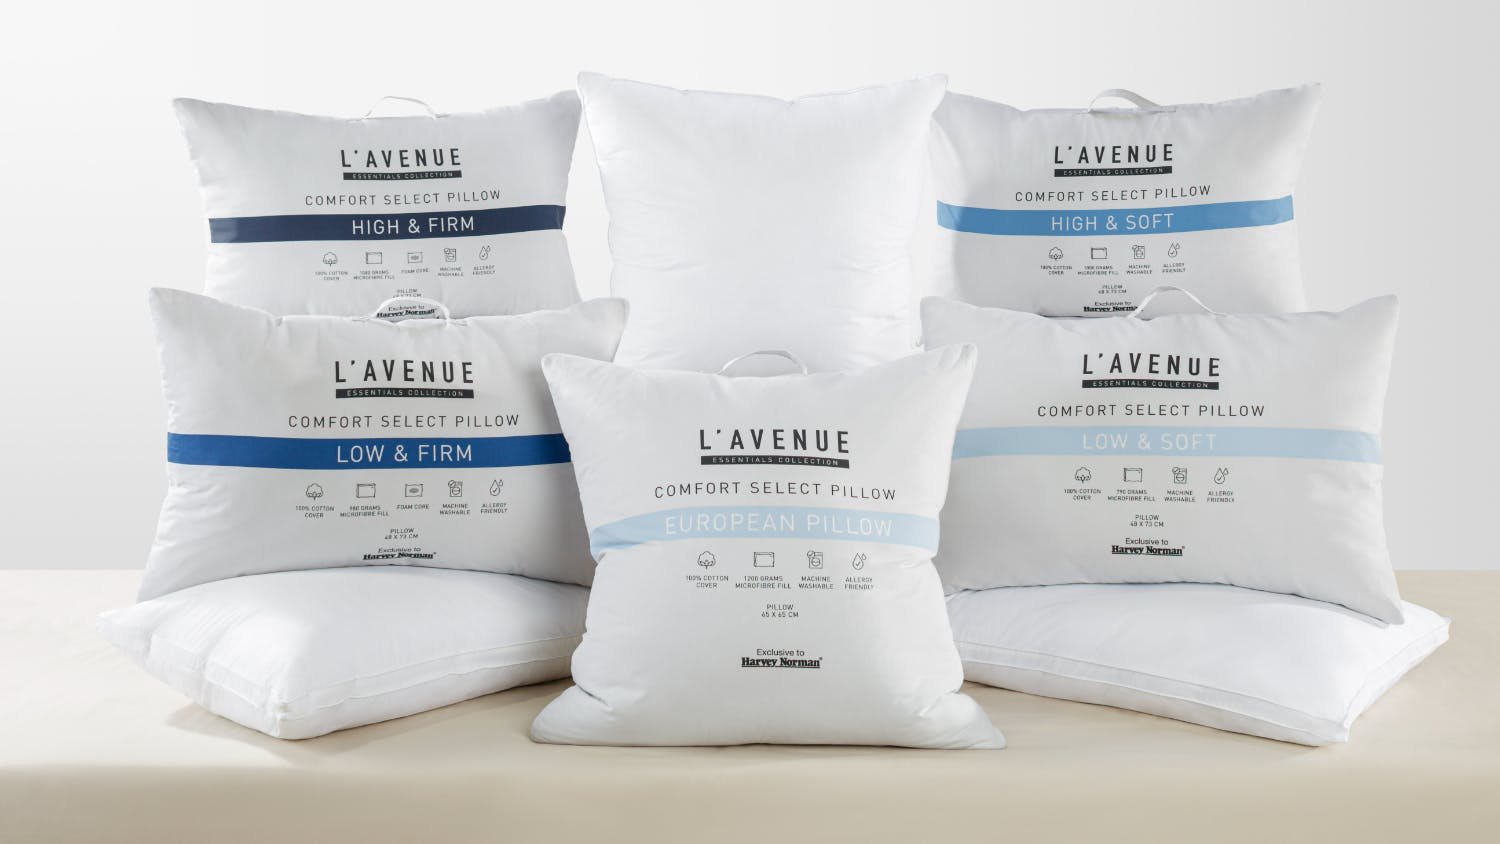 Comfort Select Low/Soft Standard Pillow by L'Avenue